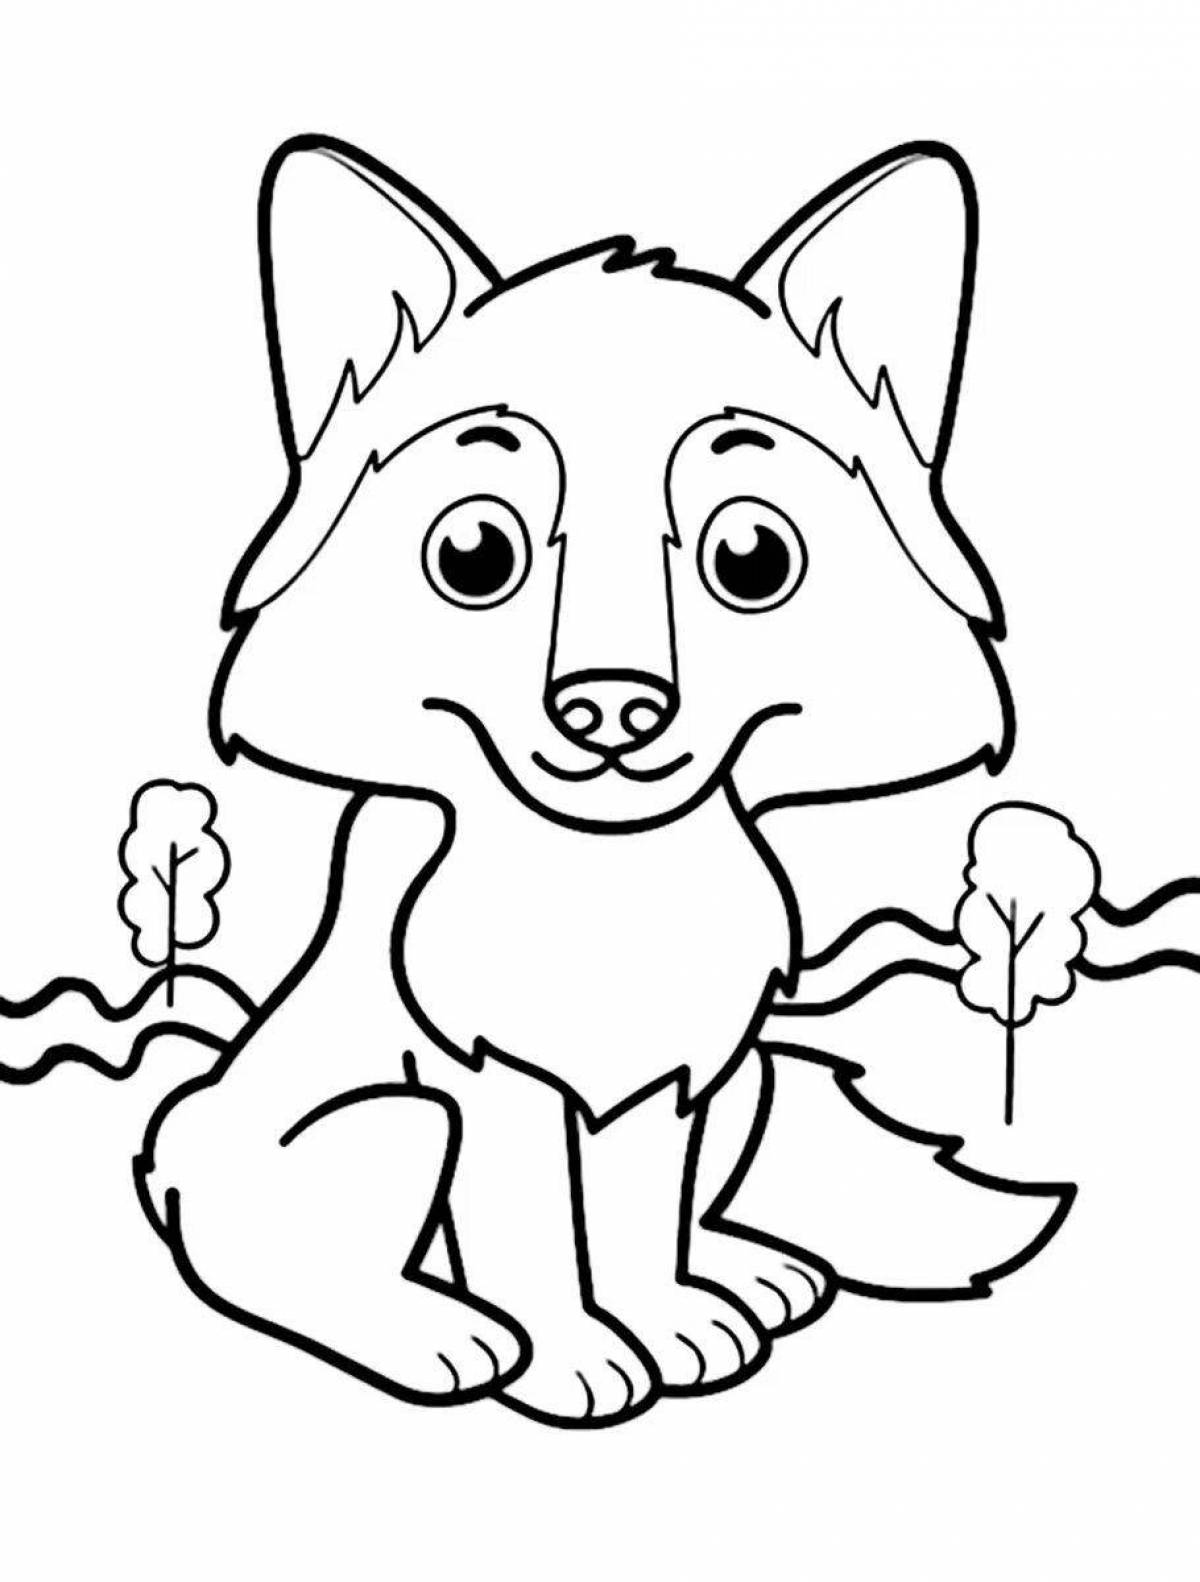 Fairytale wolf coloring book for kids